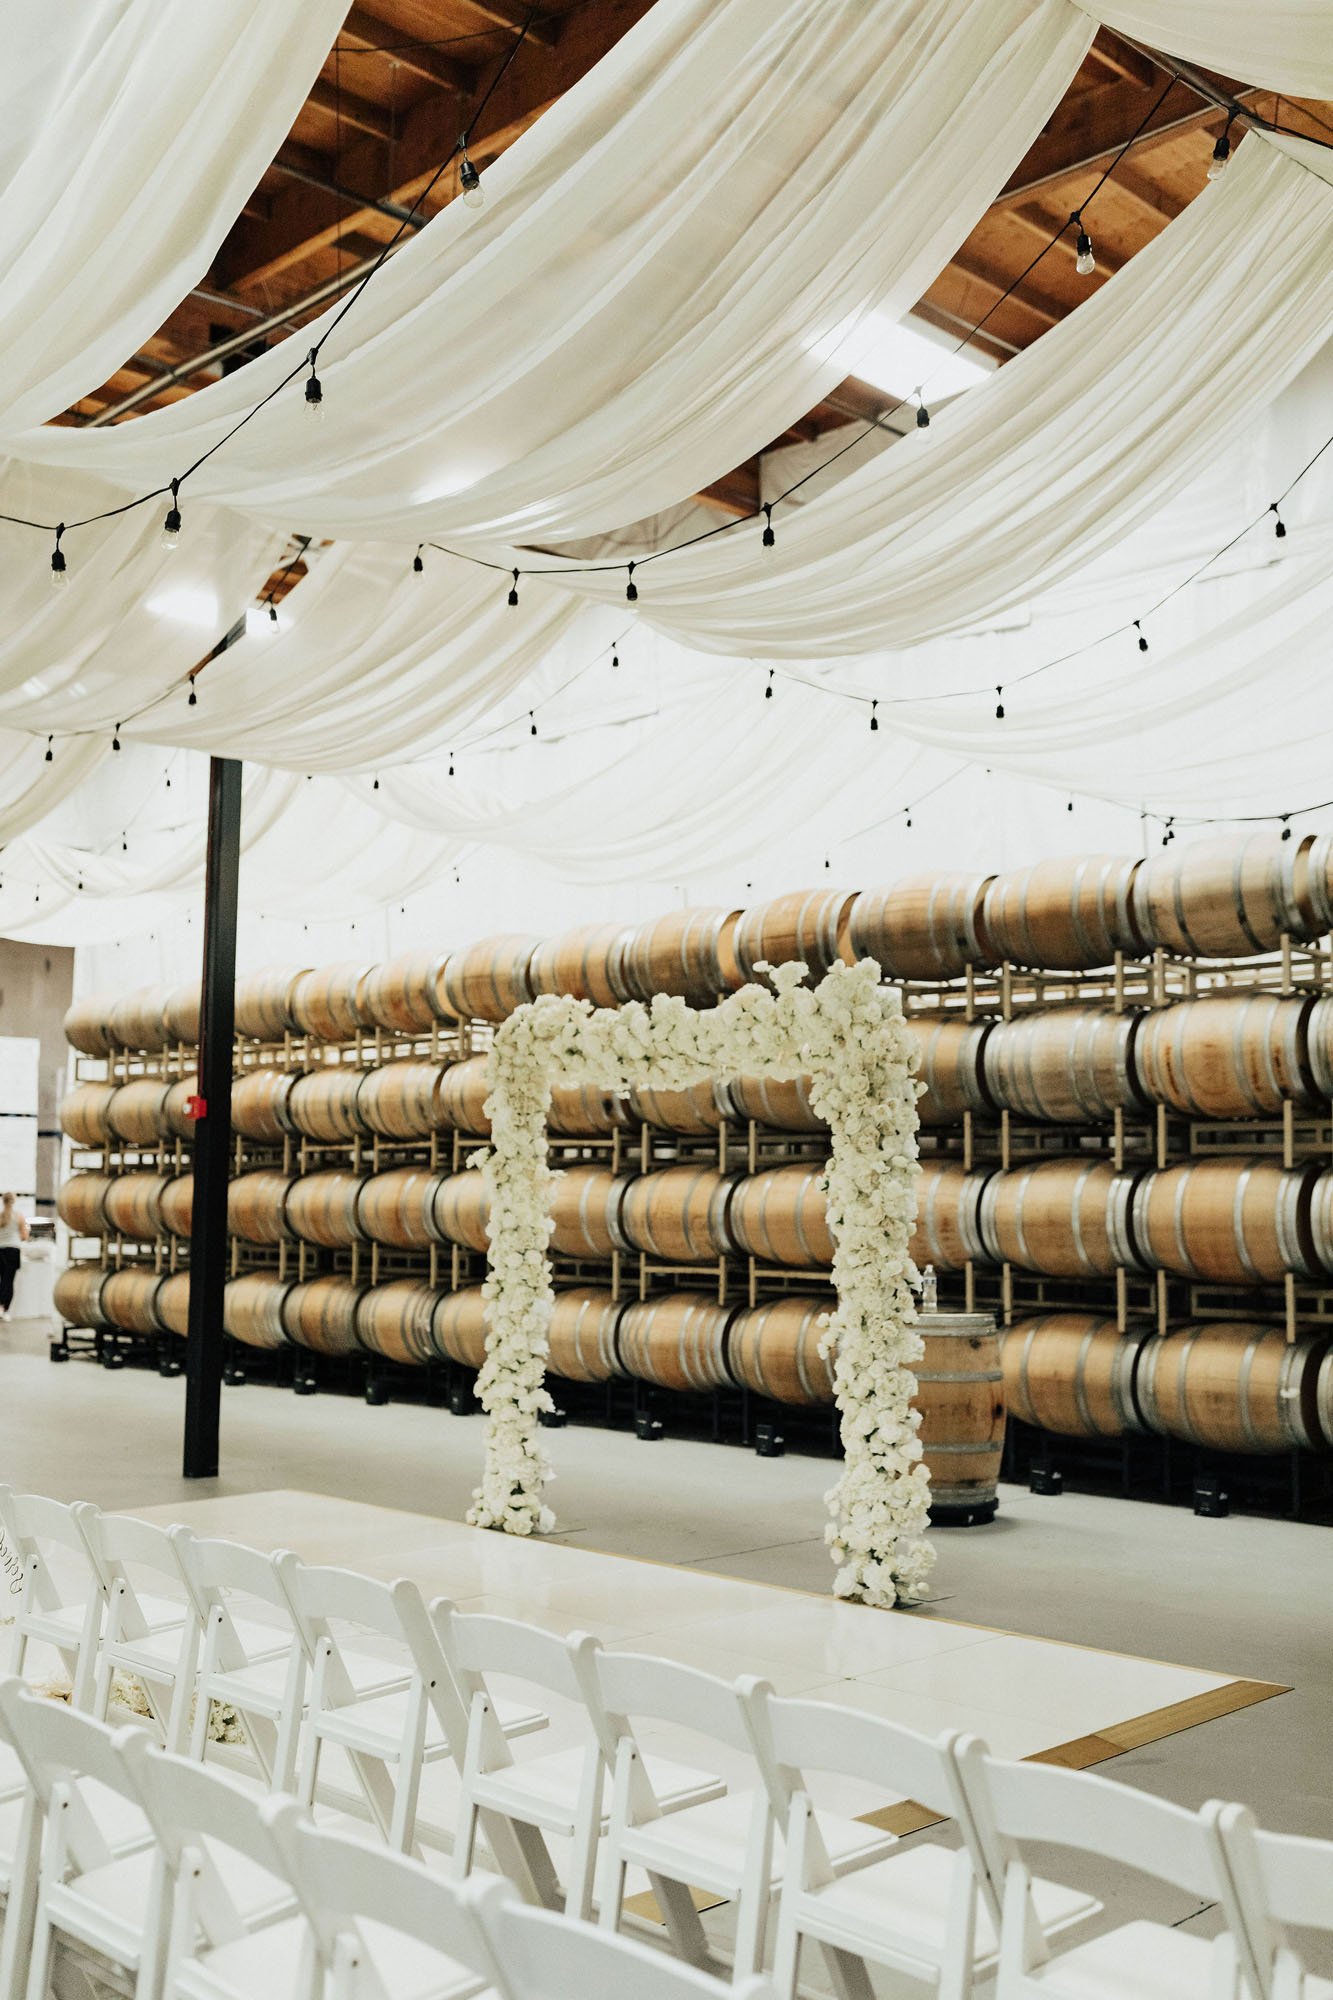  Photograph of a modern ceremony arbor in a vineyard in Washington. There is a large white floral arbor covered in white roses and hydrangeas in front of a wall of oak barrels for storing wine. The ceilings are draped with white silk and bistro light